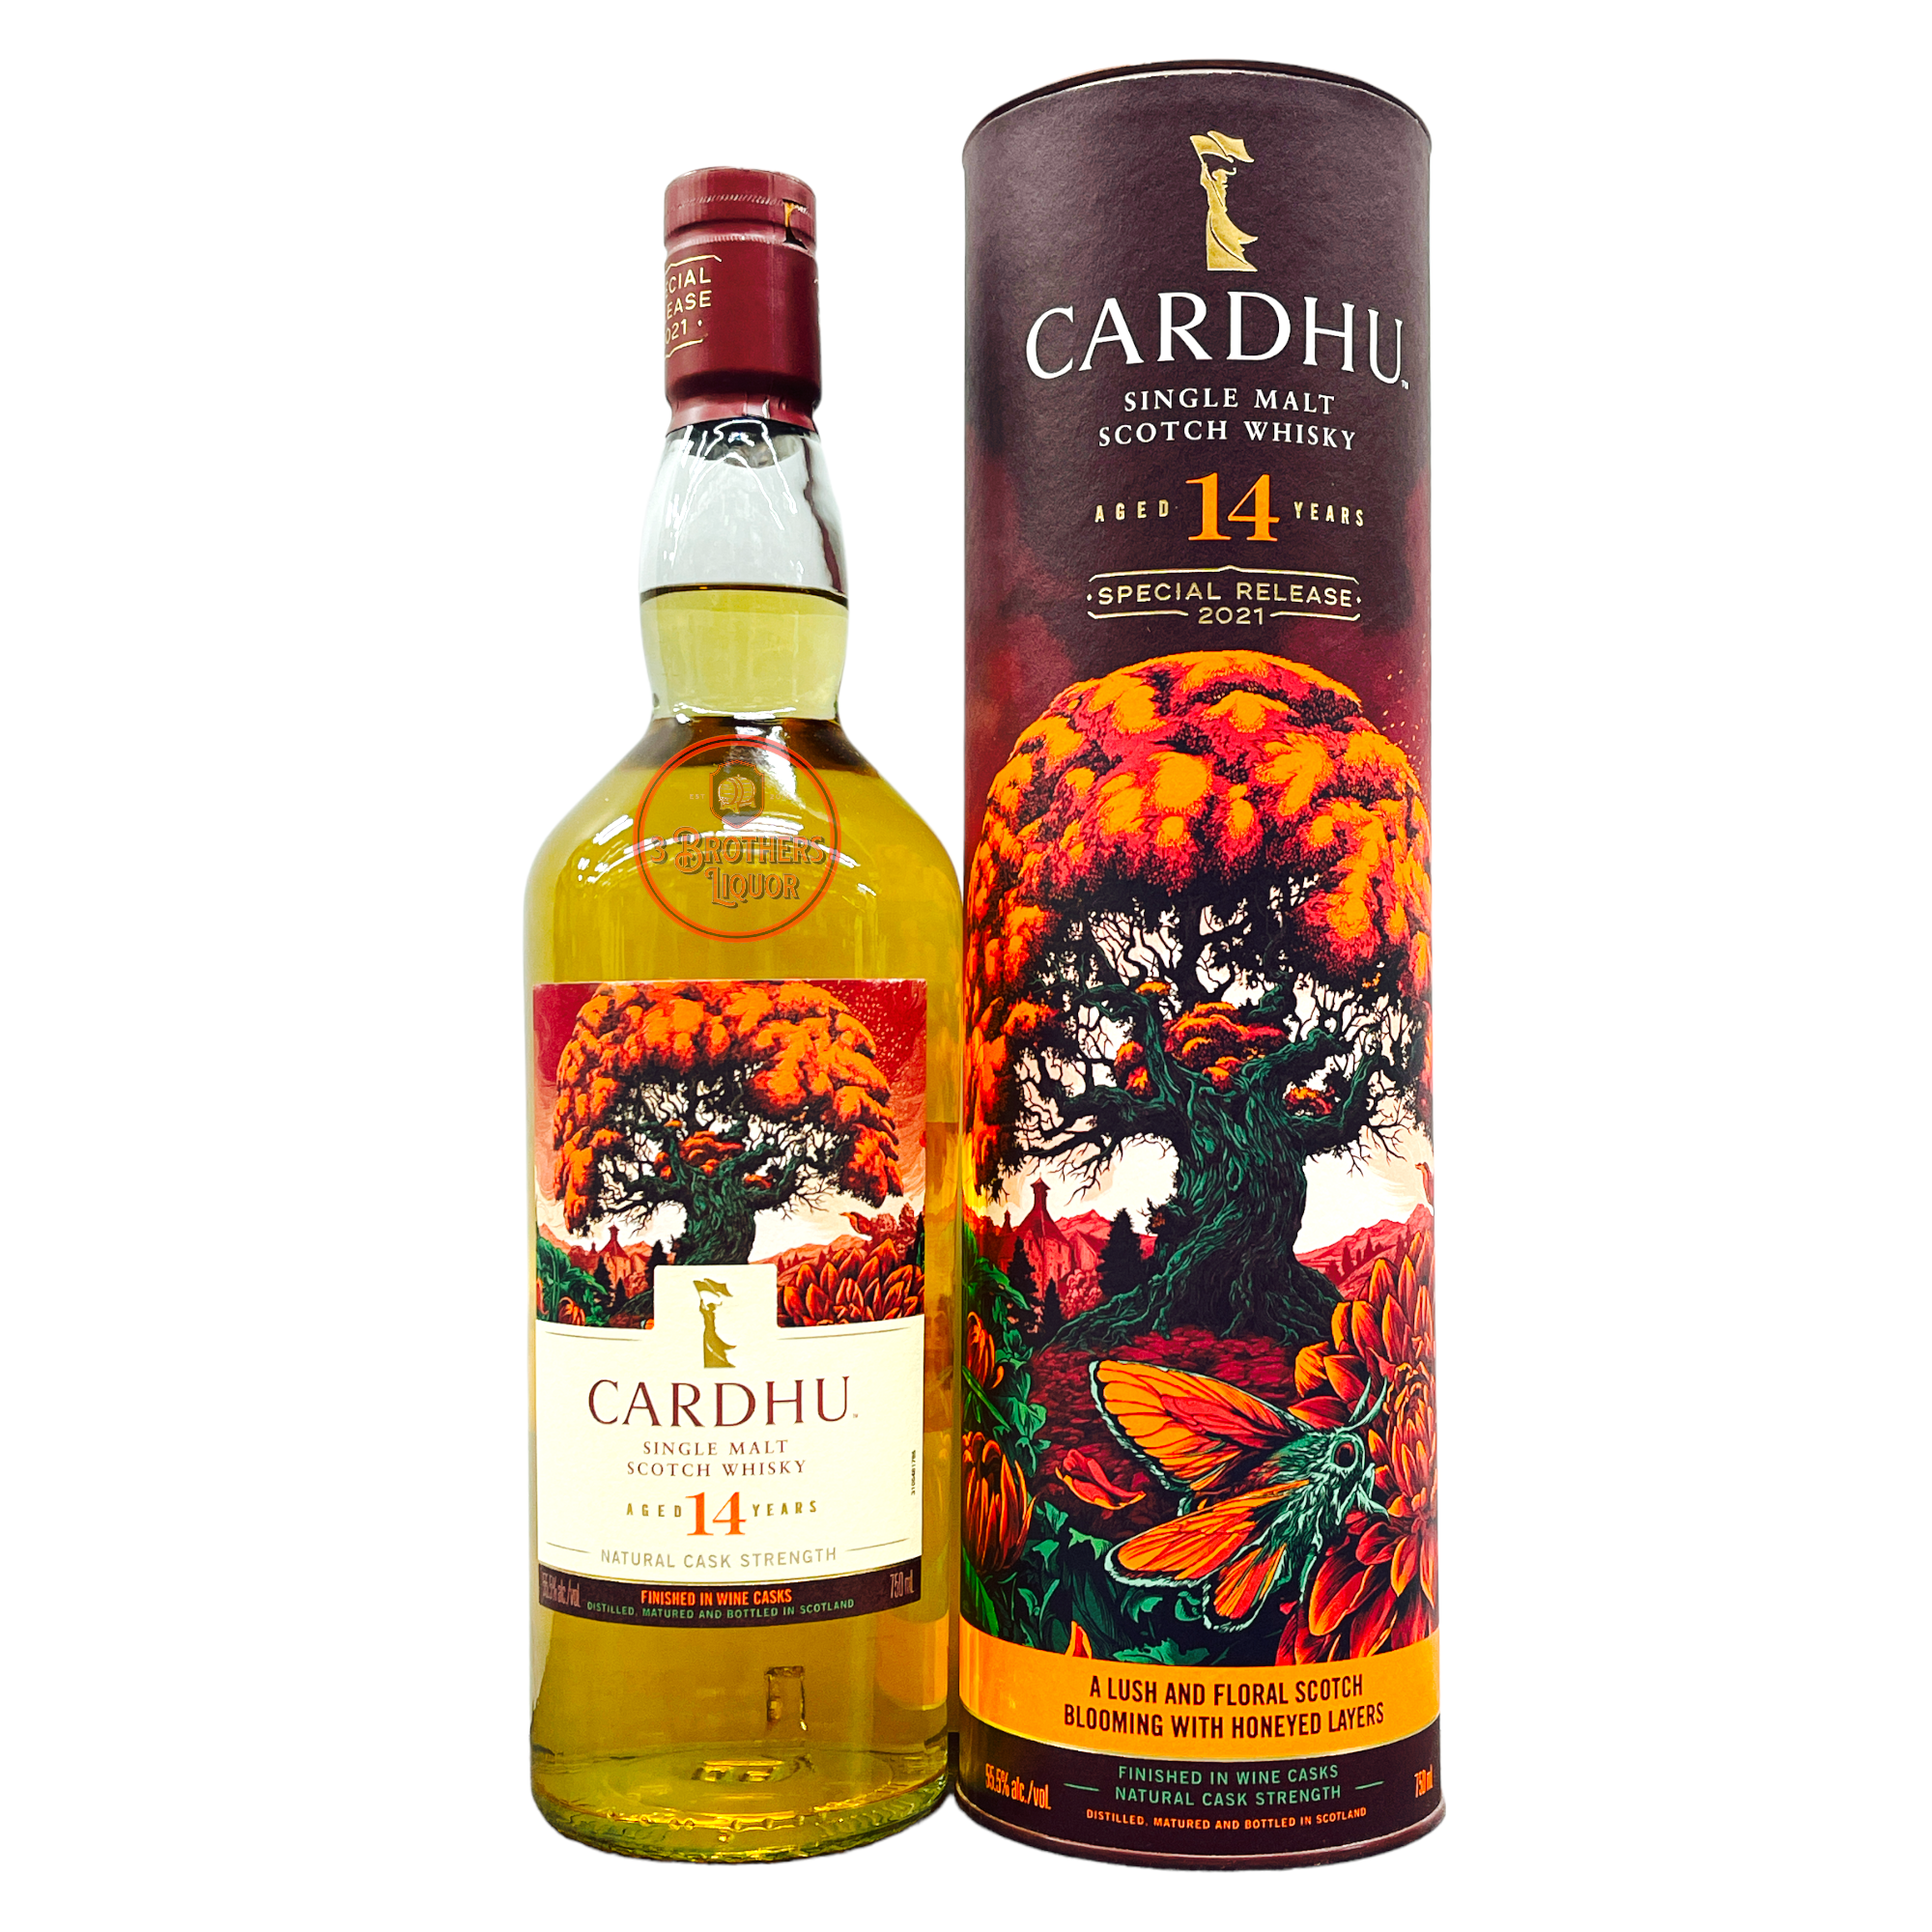 Cardhu Aged 14 Years Single Malt Scotch Whisky (Special Release 2021)